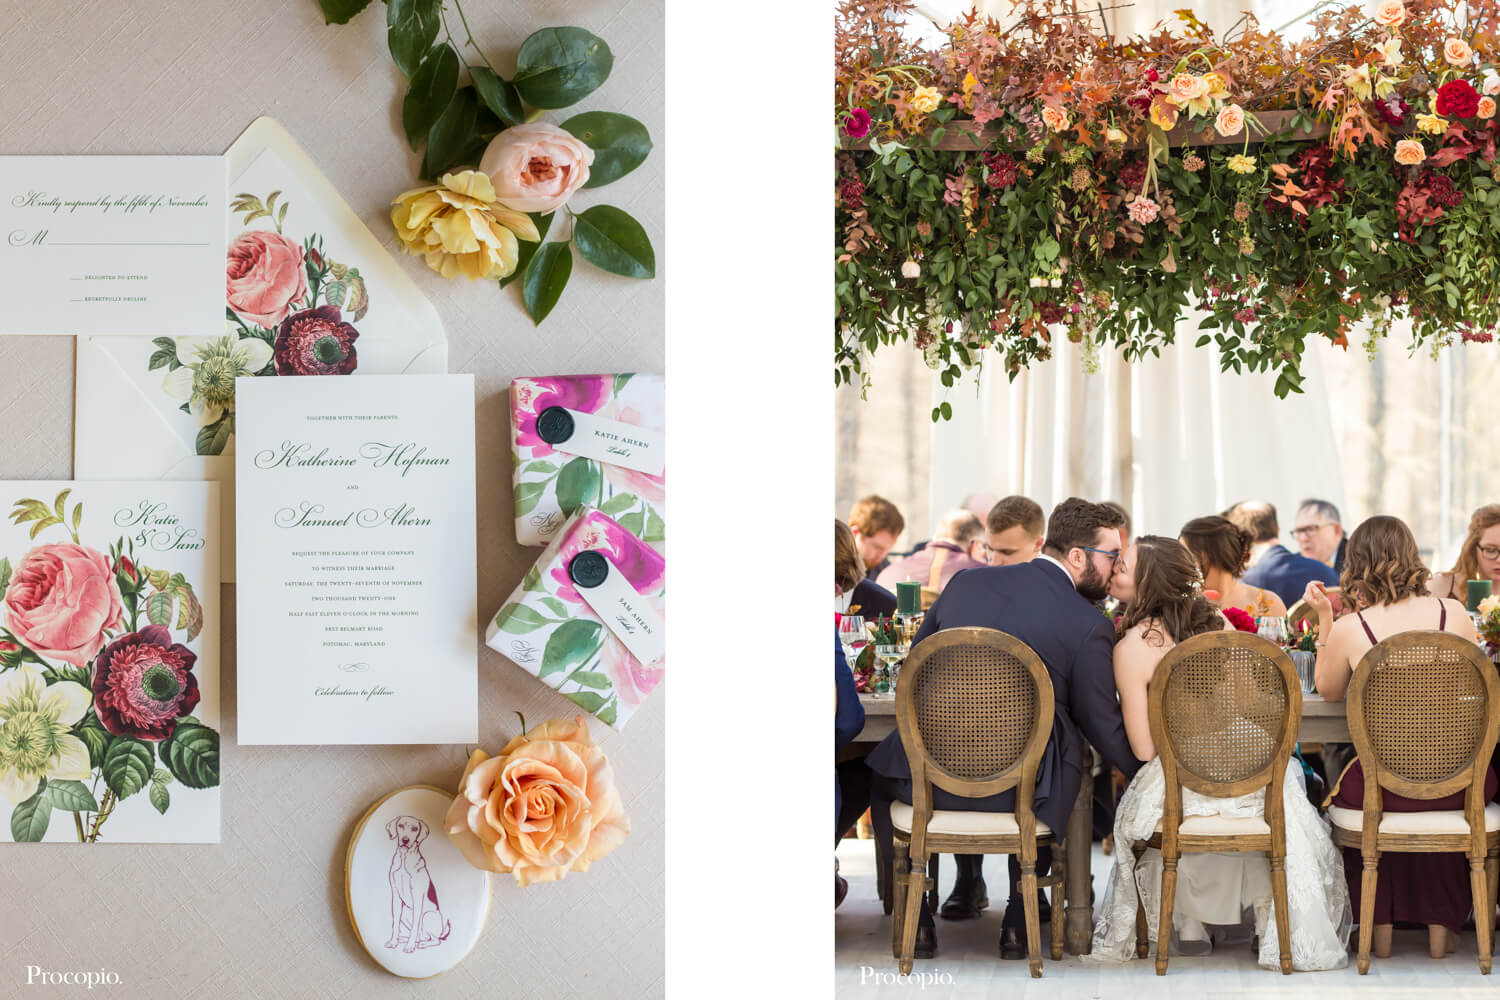 Rose invitations and floral chandelier -Bella Notte - best Washington DC wedding planner - photo by Procopio Photography